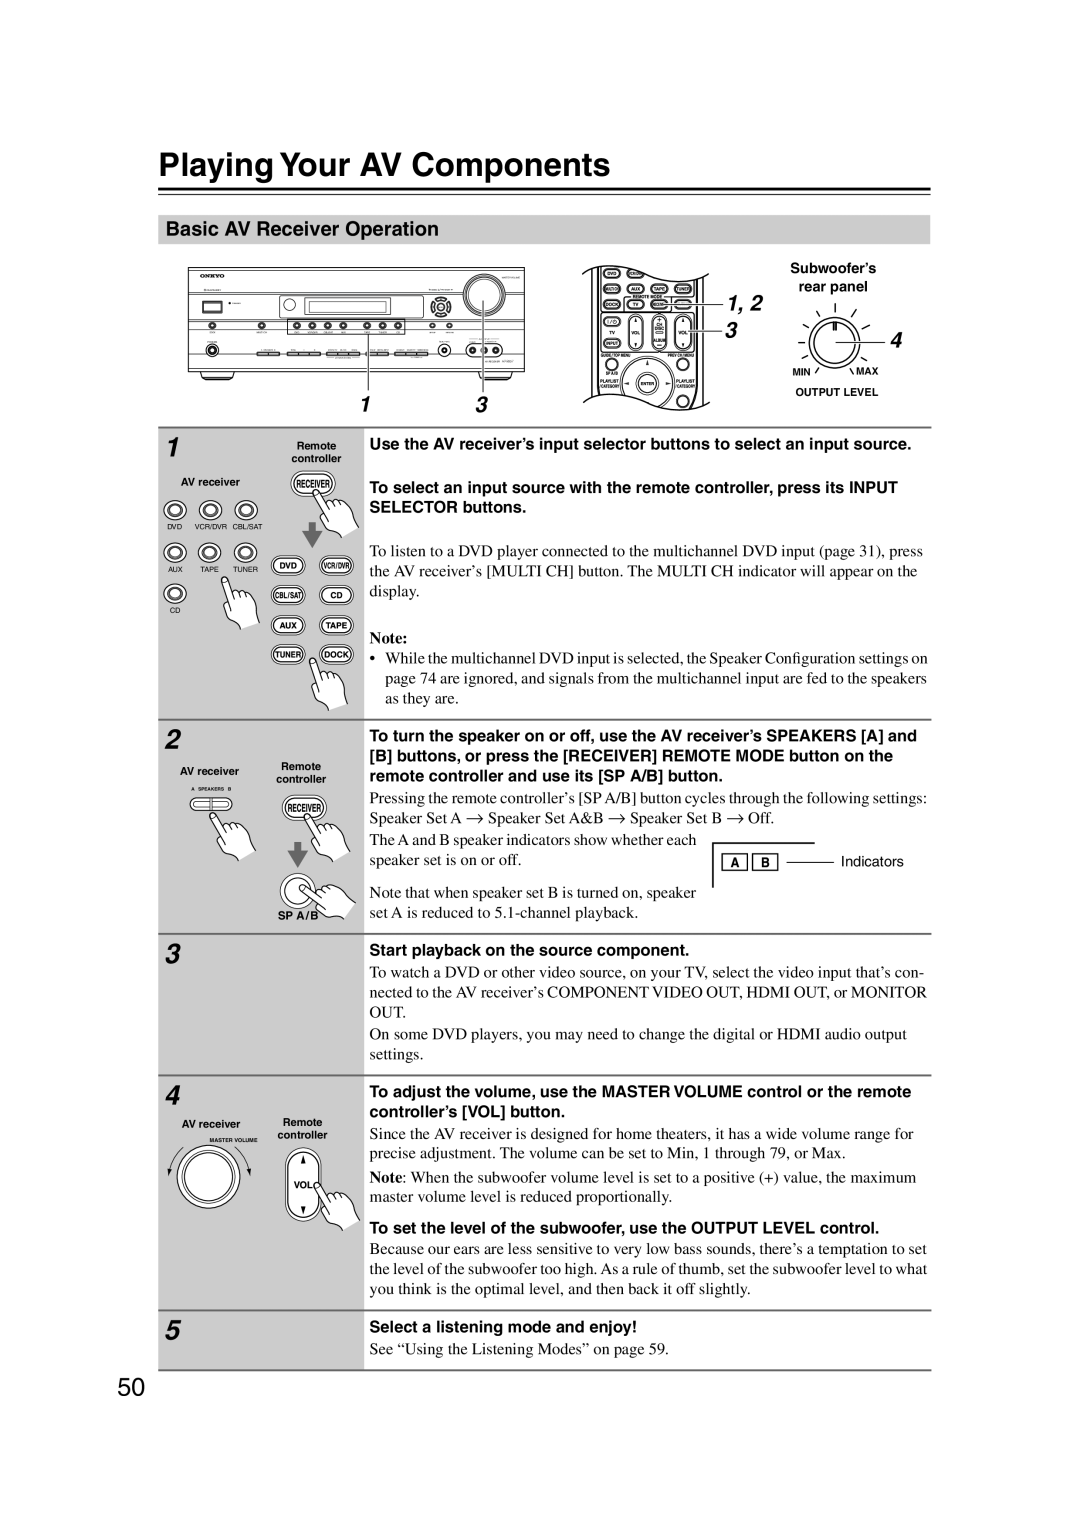 Onkyo HT-S6100 Playing Your AV Components, Basic AV Receiver Operation, See “Using the Listening Modes” on page 